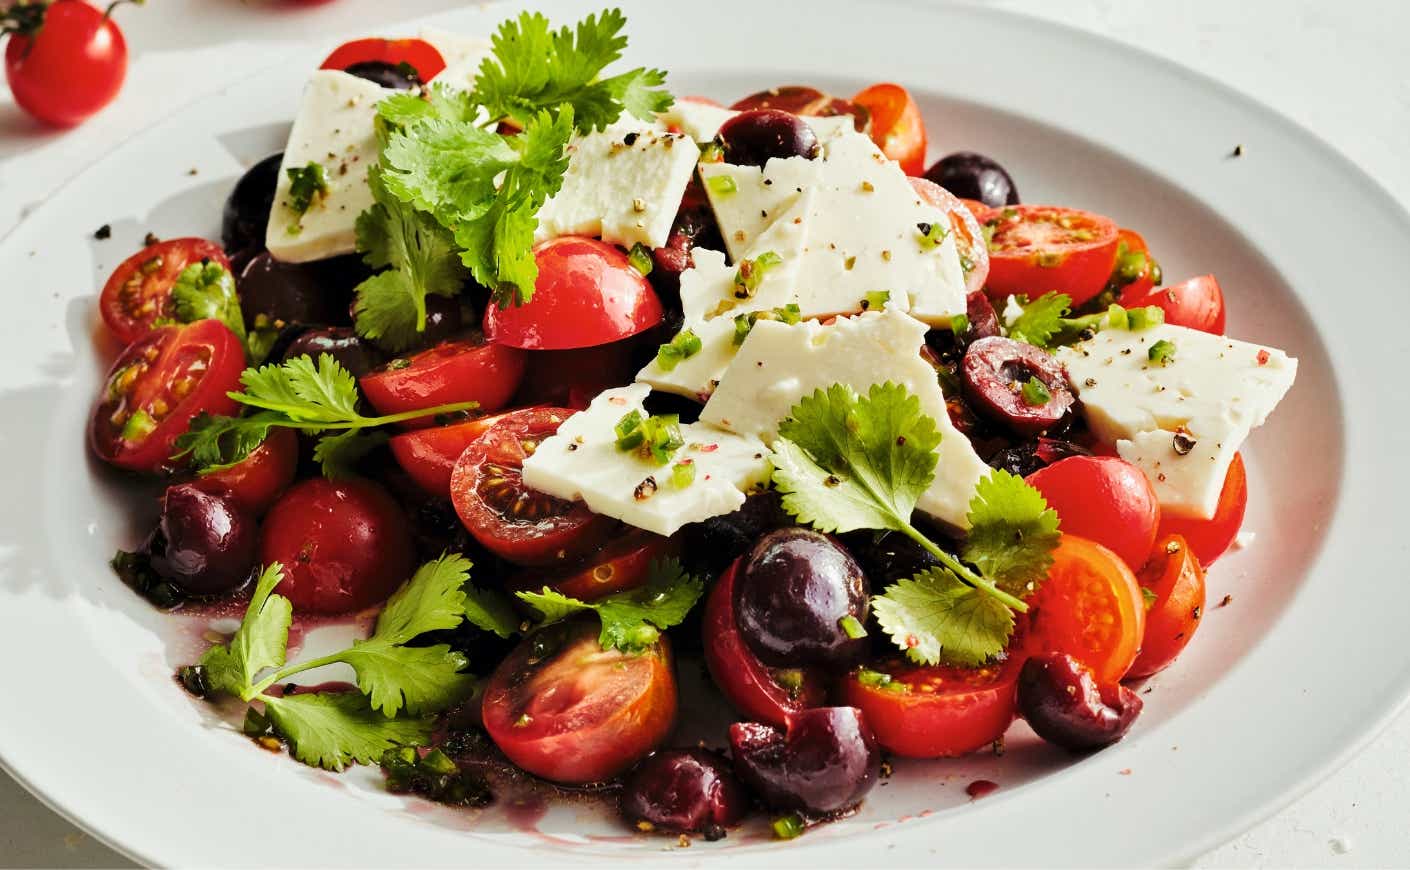 A salad with cherries, tomatoes, feta, and herbs.